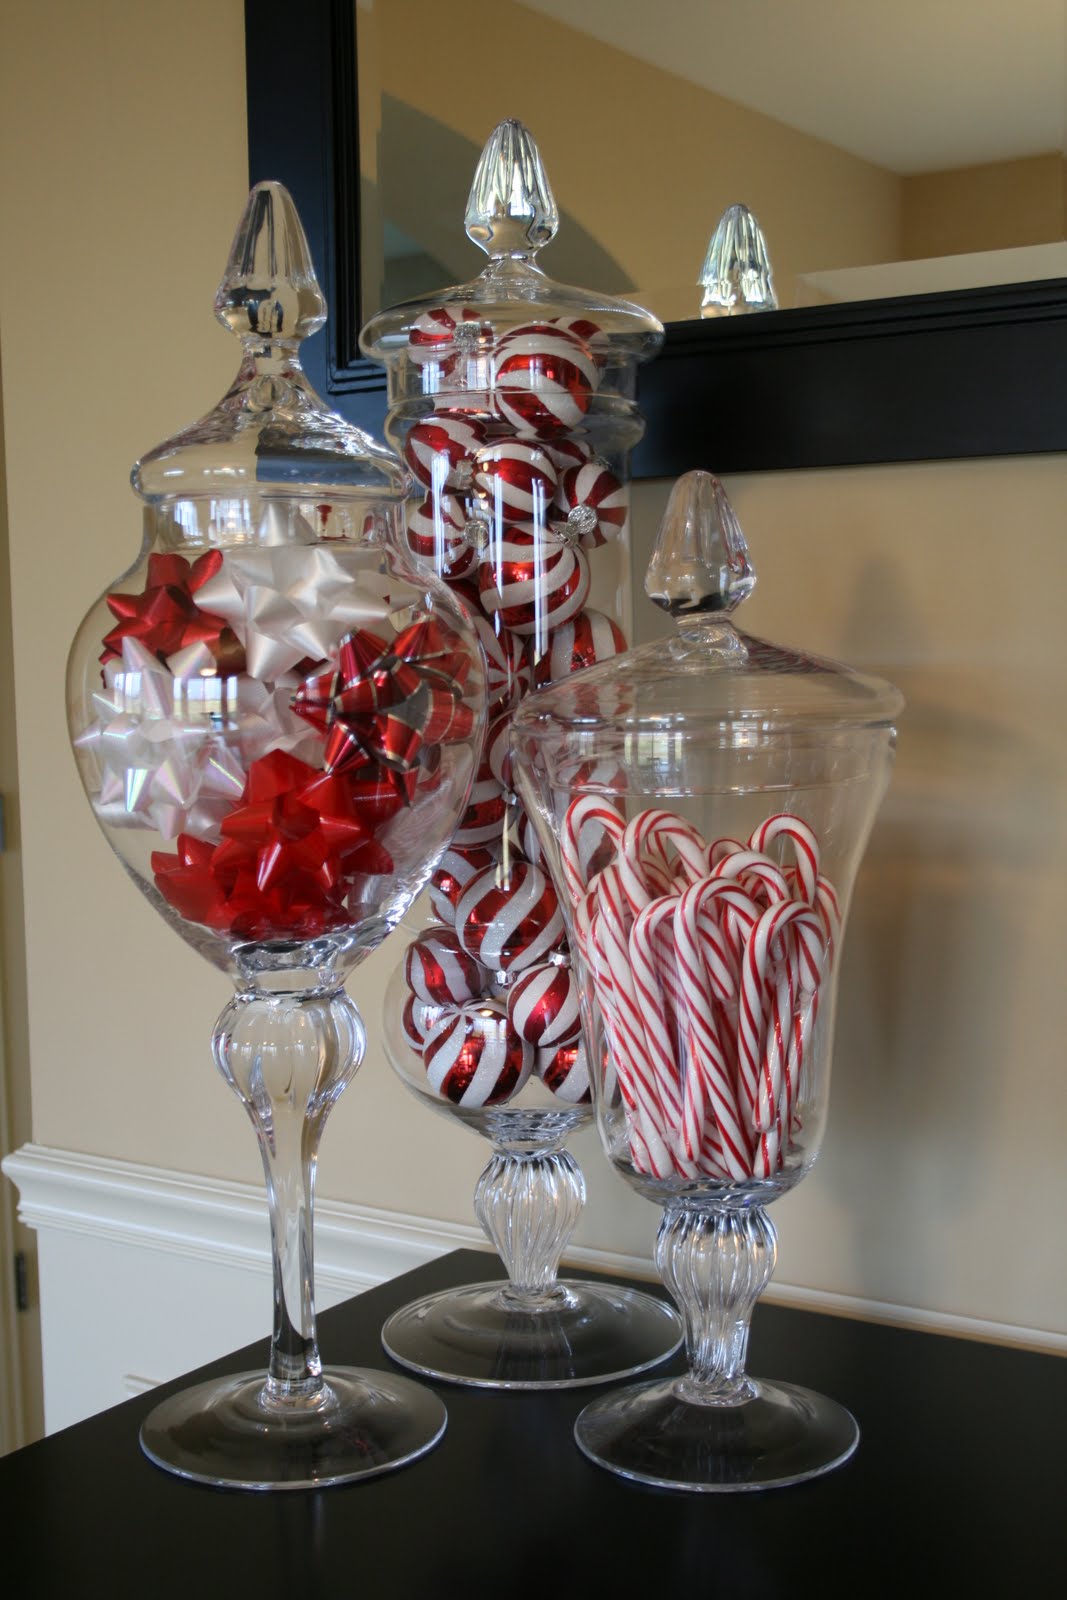 ... | From Snow Globes to Card Art: 7 Simple DIY Holiday Decor Ideas